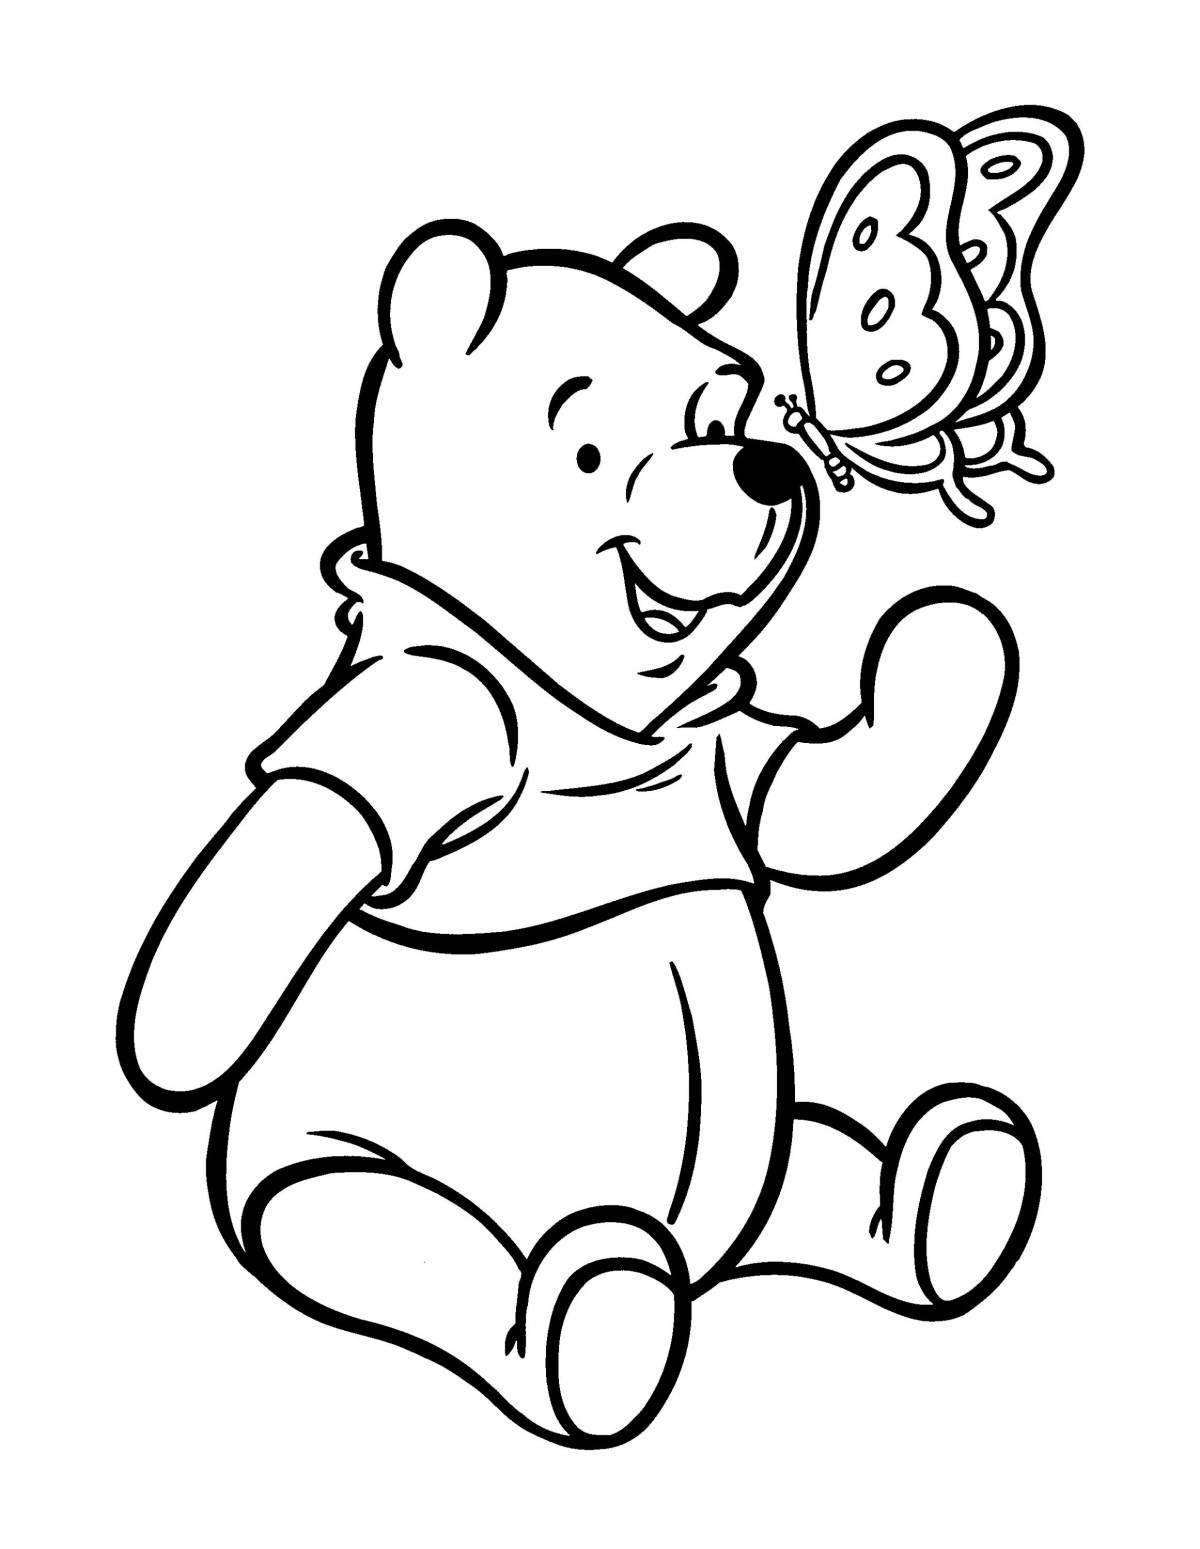 Adorable winnie the pooh coloring book for kids